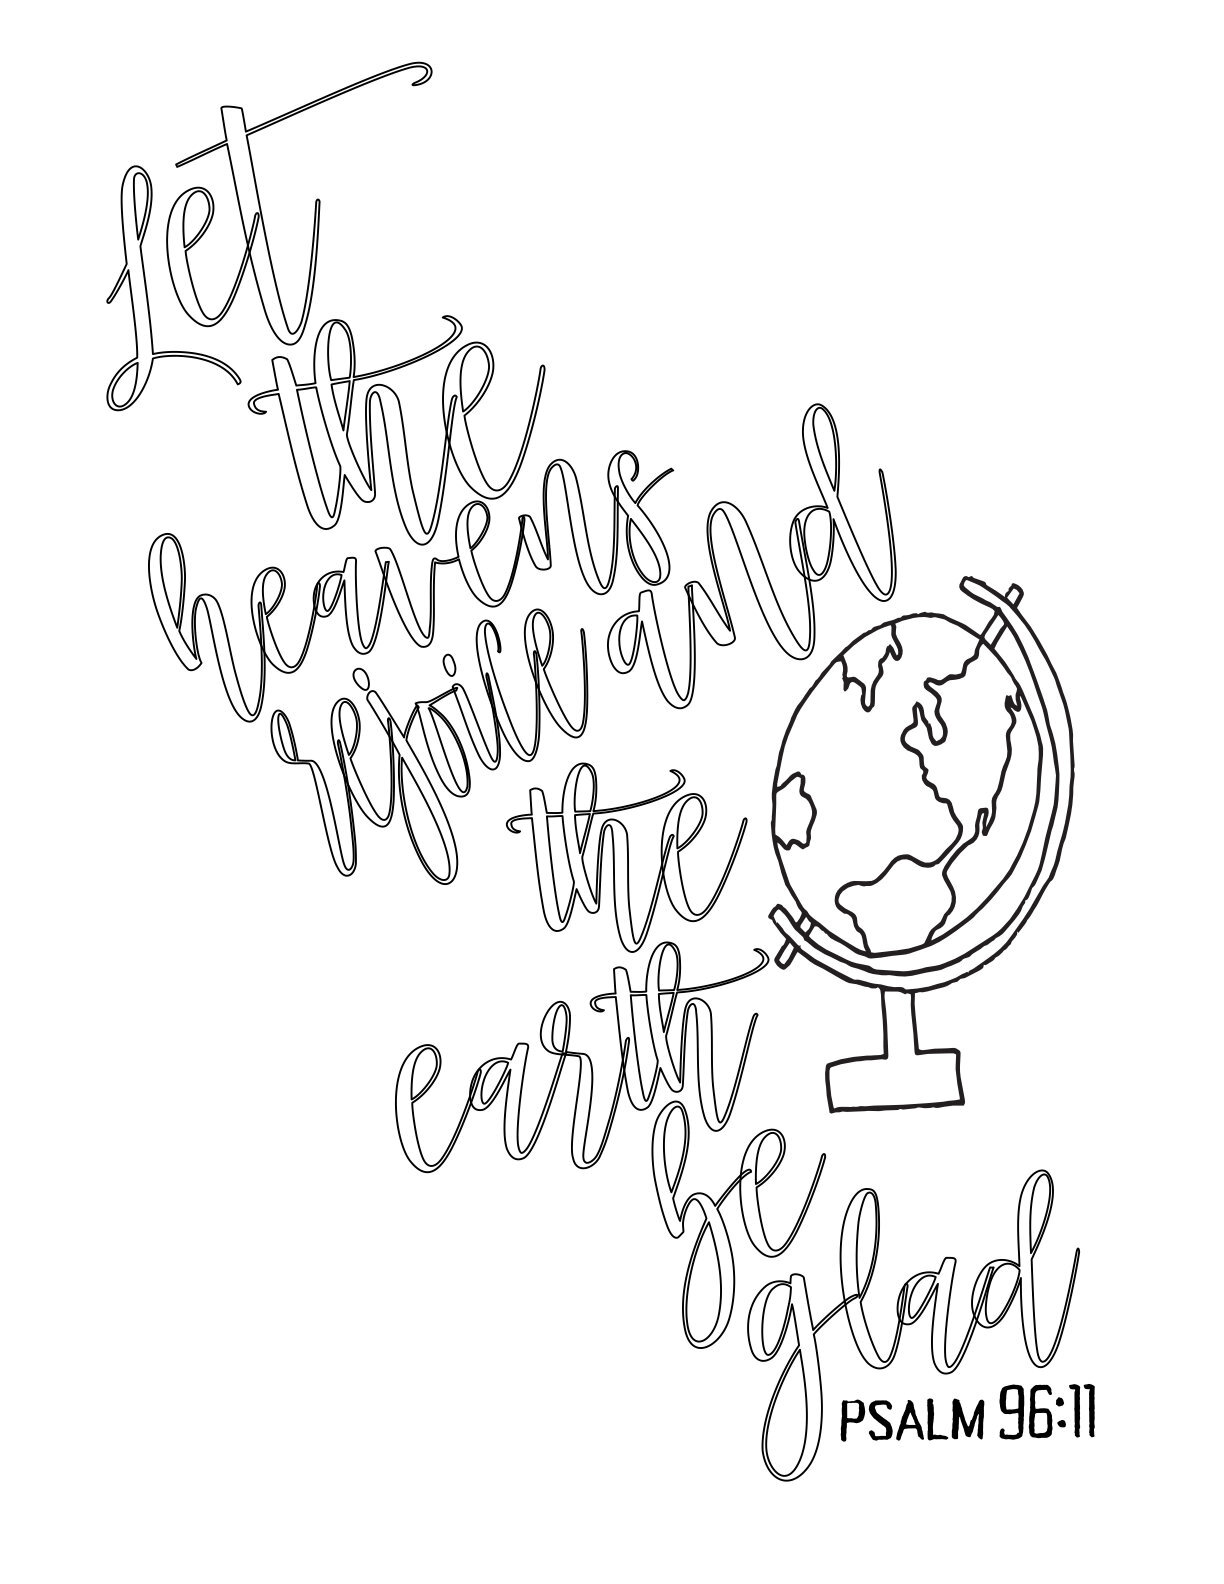 Free Advent coloring Page- Let The Heavens Rejoice And The Earth Be Glad - Pslam 96 - Free Christmas Printable CLICK HERE TO DOWNLOAD YOUR FREE HEAVENS REJOICE PRINTABLE CHRISTMAS PAGE